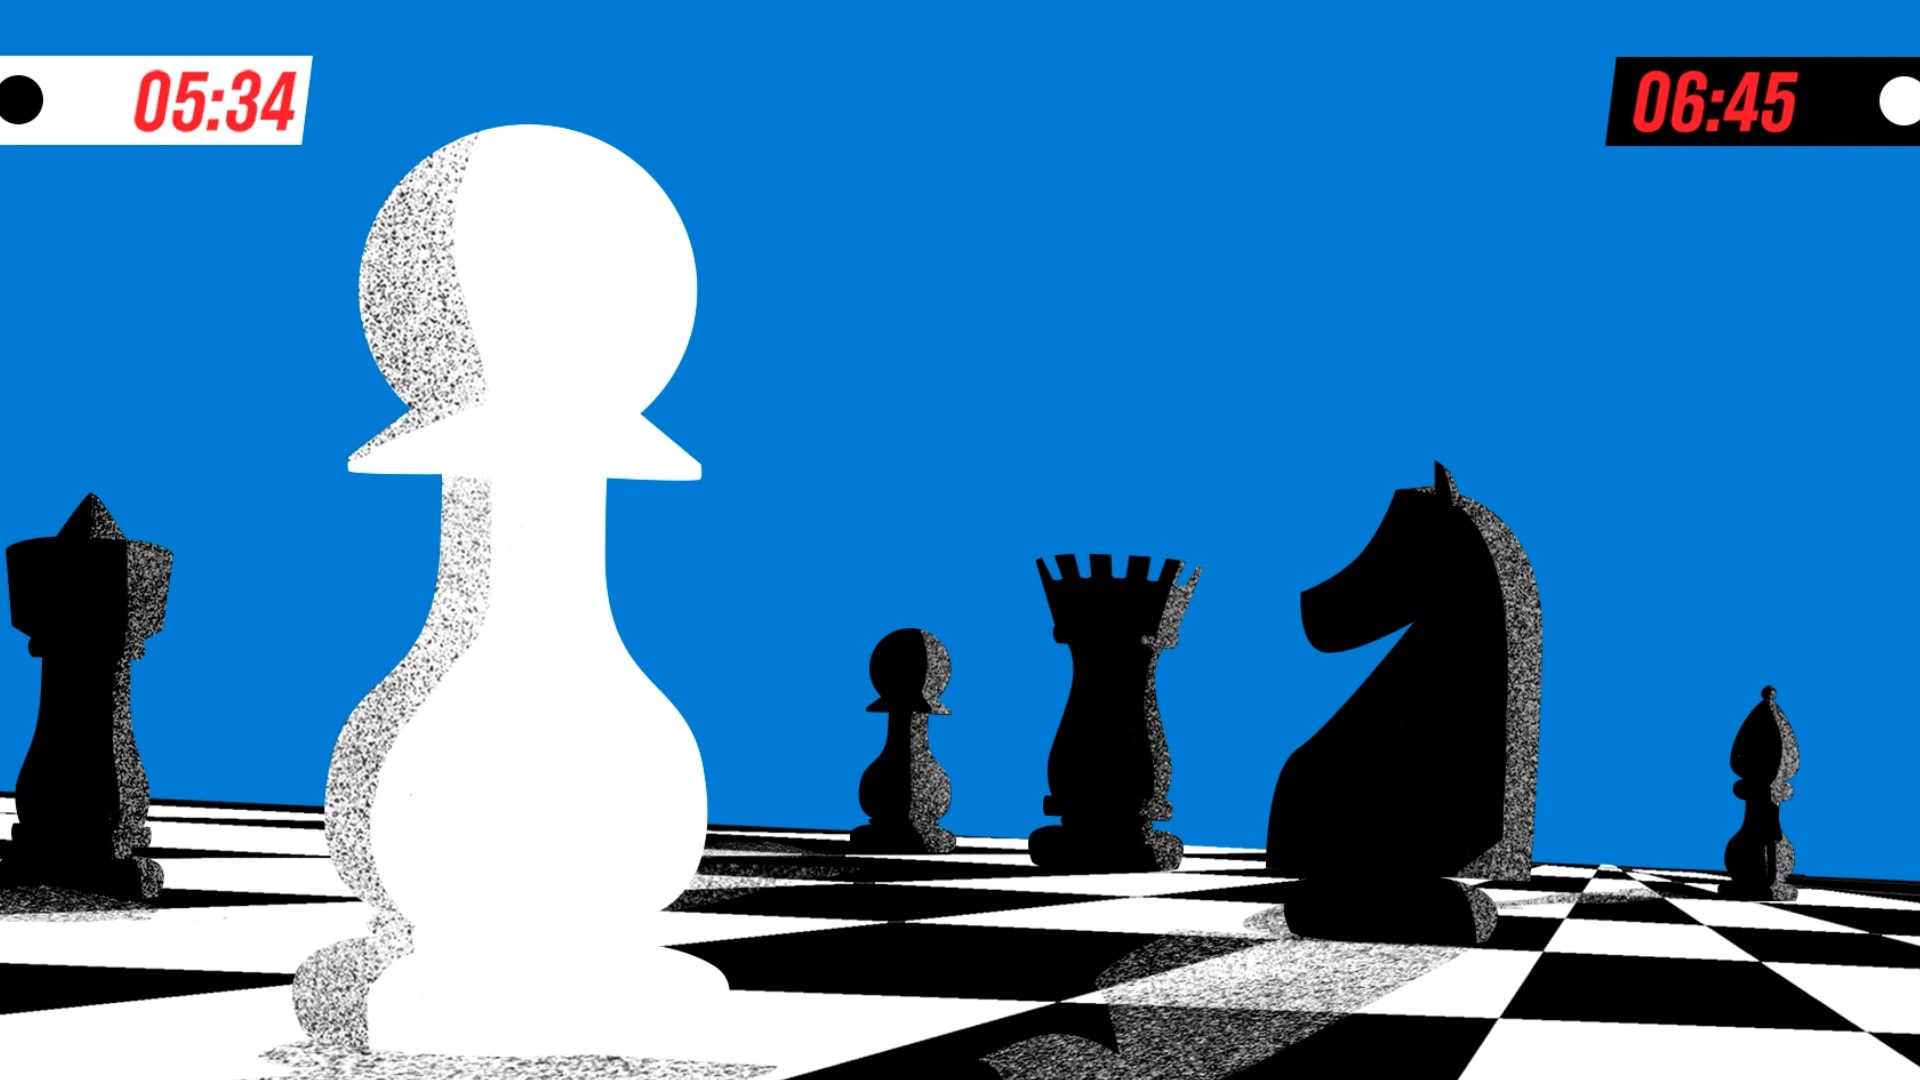 Chess Videos - Lessons, Broadcasts and Shows 